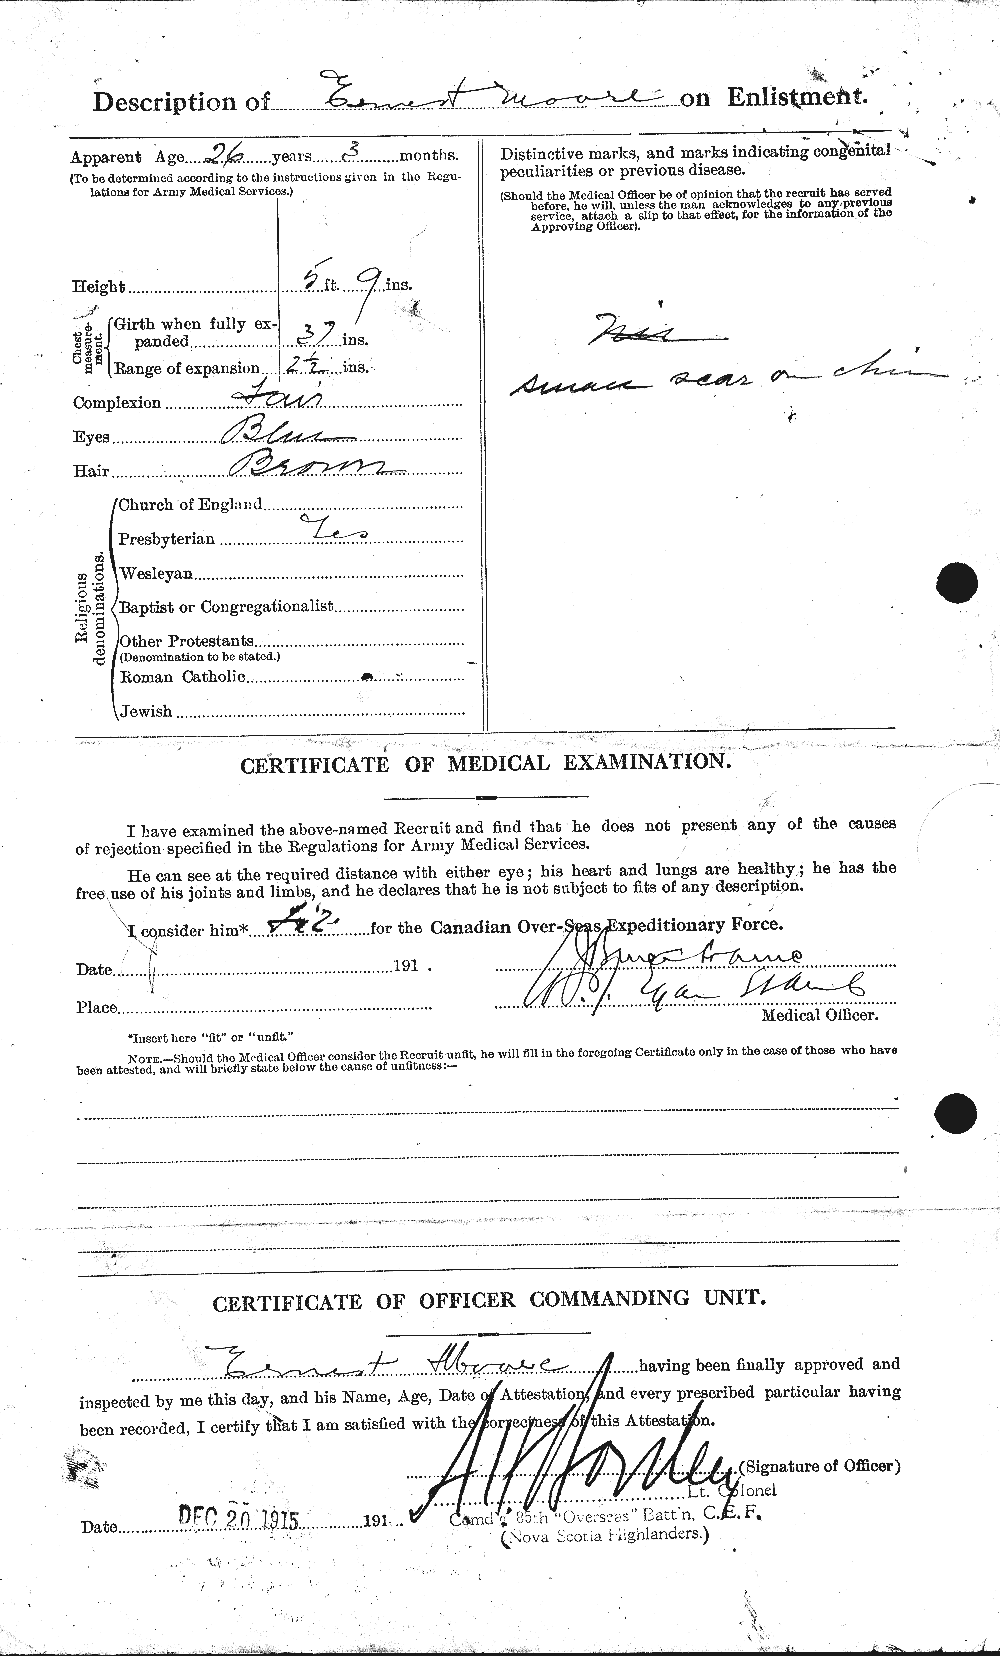 Personnel Records of the First World War - CEF 506658b